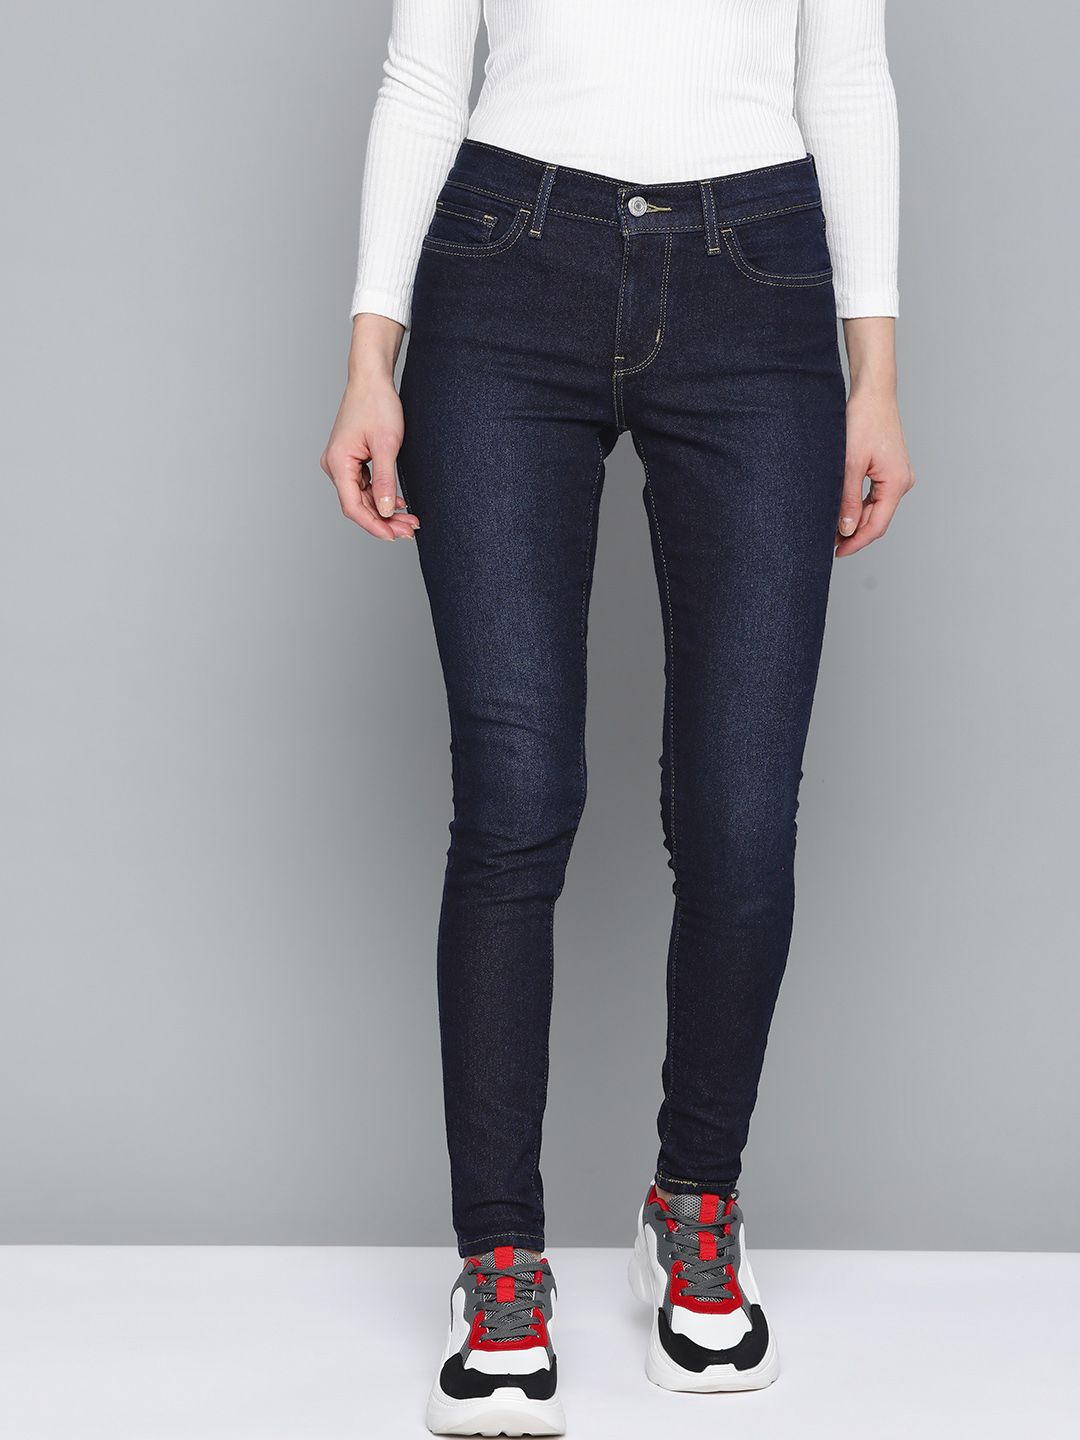 Levis Women Navy Blue Super Skinny Fit Stretchable Jeans 710 Price in India